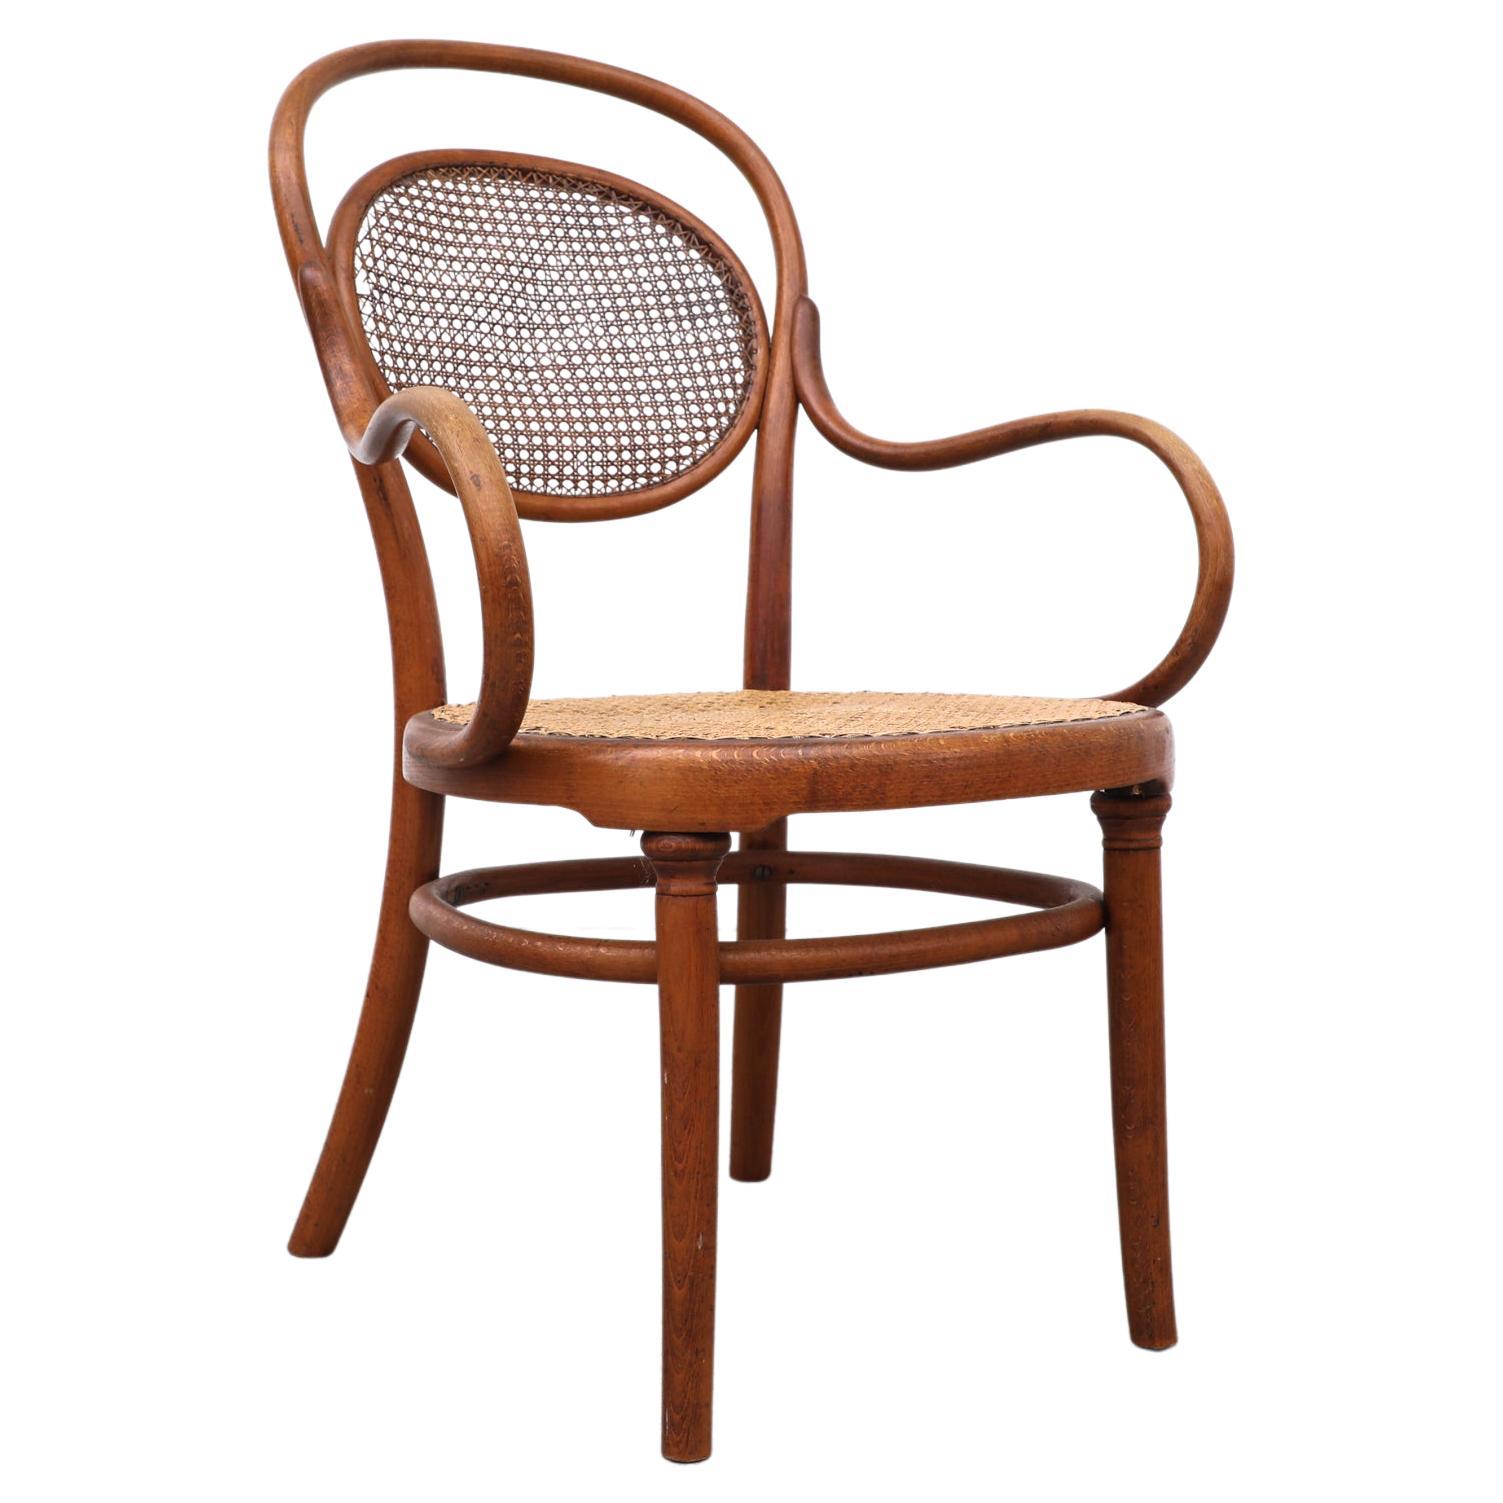 No 12 Thonet Caned Bistro Armchair, 1881-1919